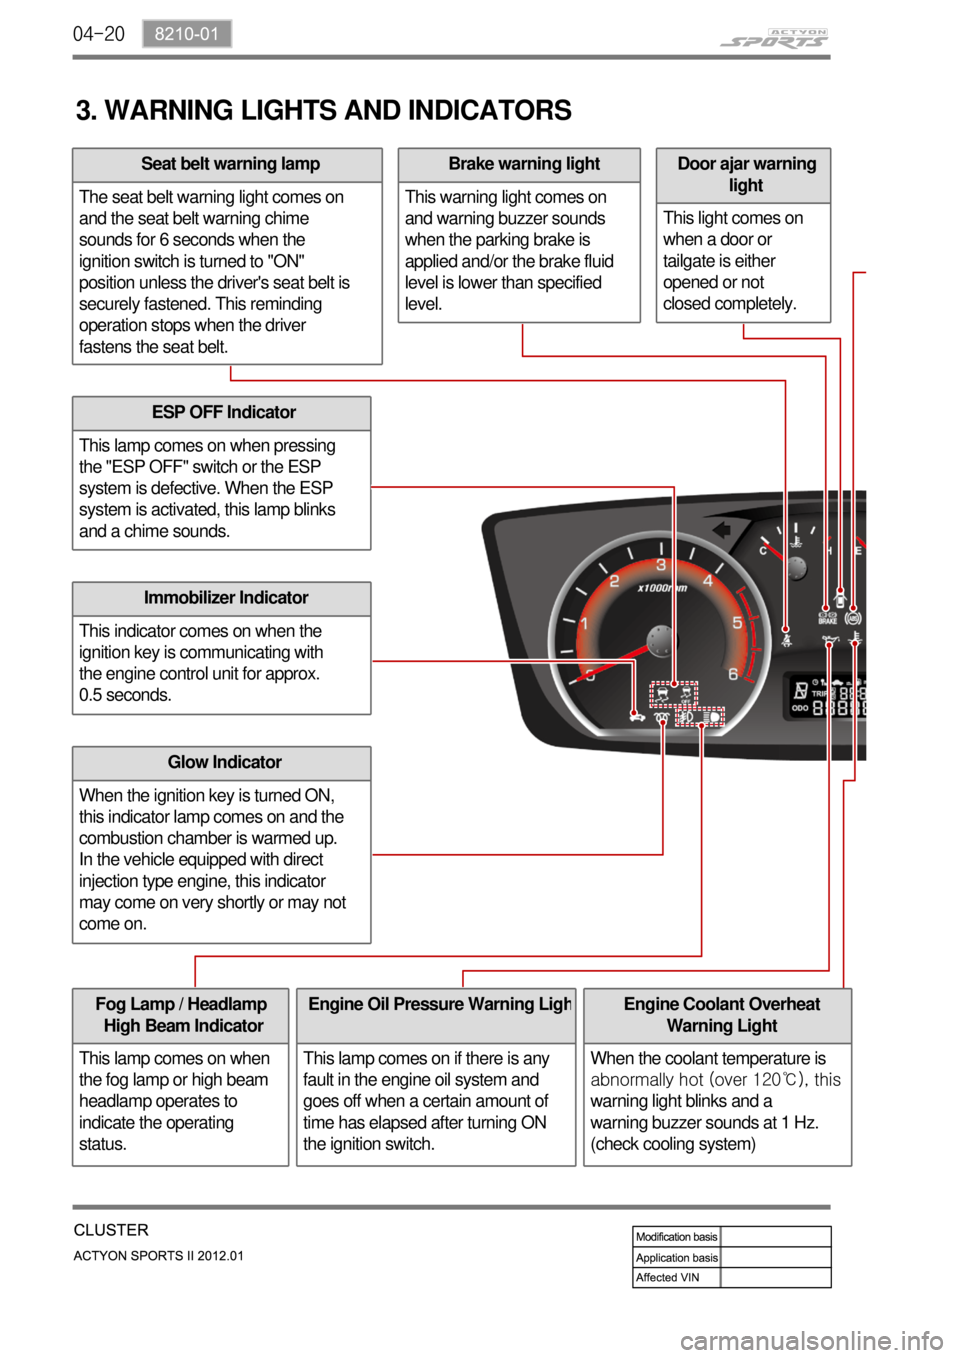 SSANGYONG NEW ACTYON SPORTS 2012  Service Manual 04-20
3. WARNING LIGHTS AND INDICATORS
ESP OFF Indicator
This lamp comes on when pressing 
the "ESP OFF" switch or the ESP 
system is defective. When the ESP 
system is activated, this lamp blinks 
an